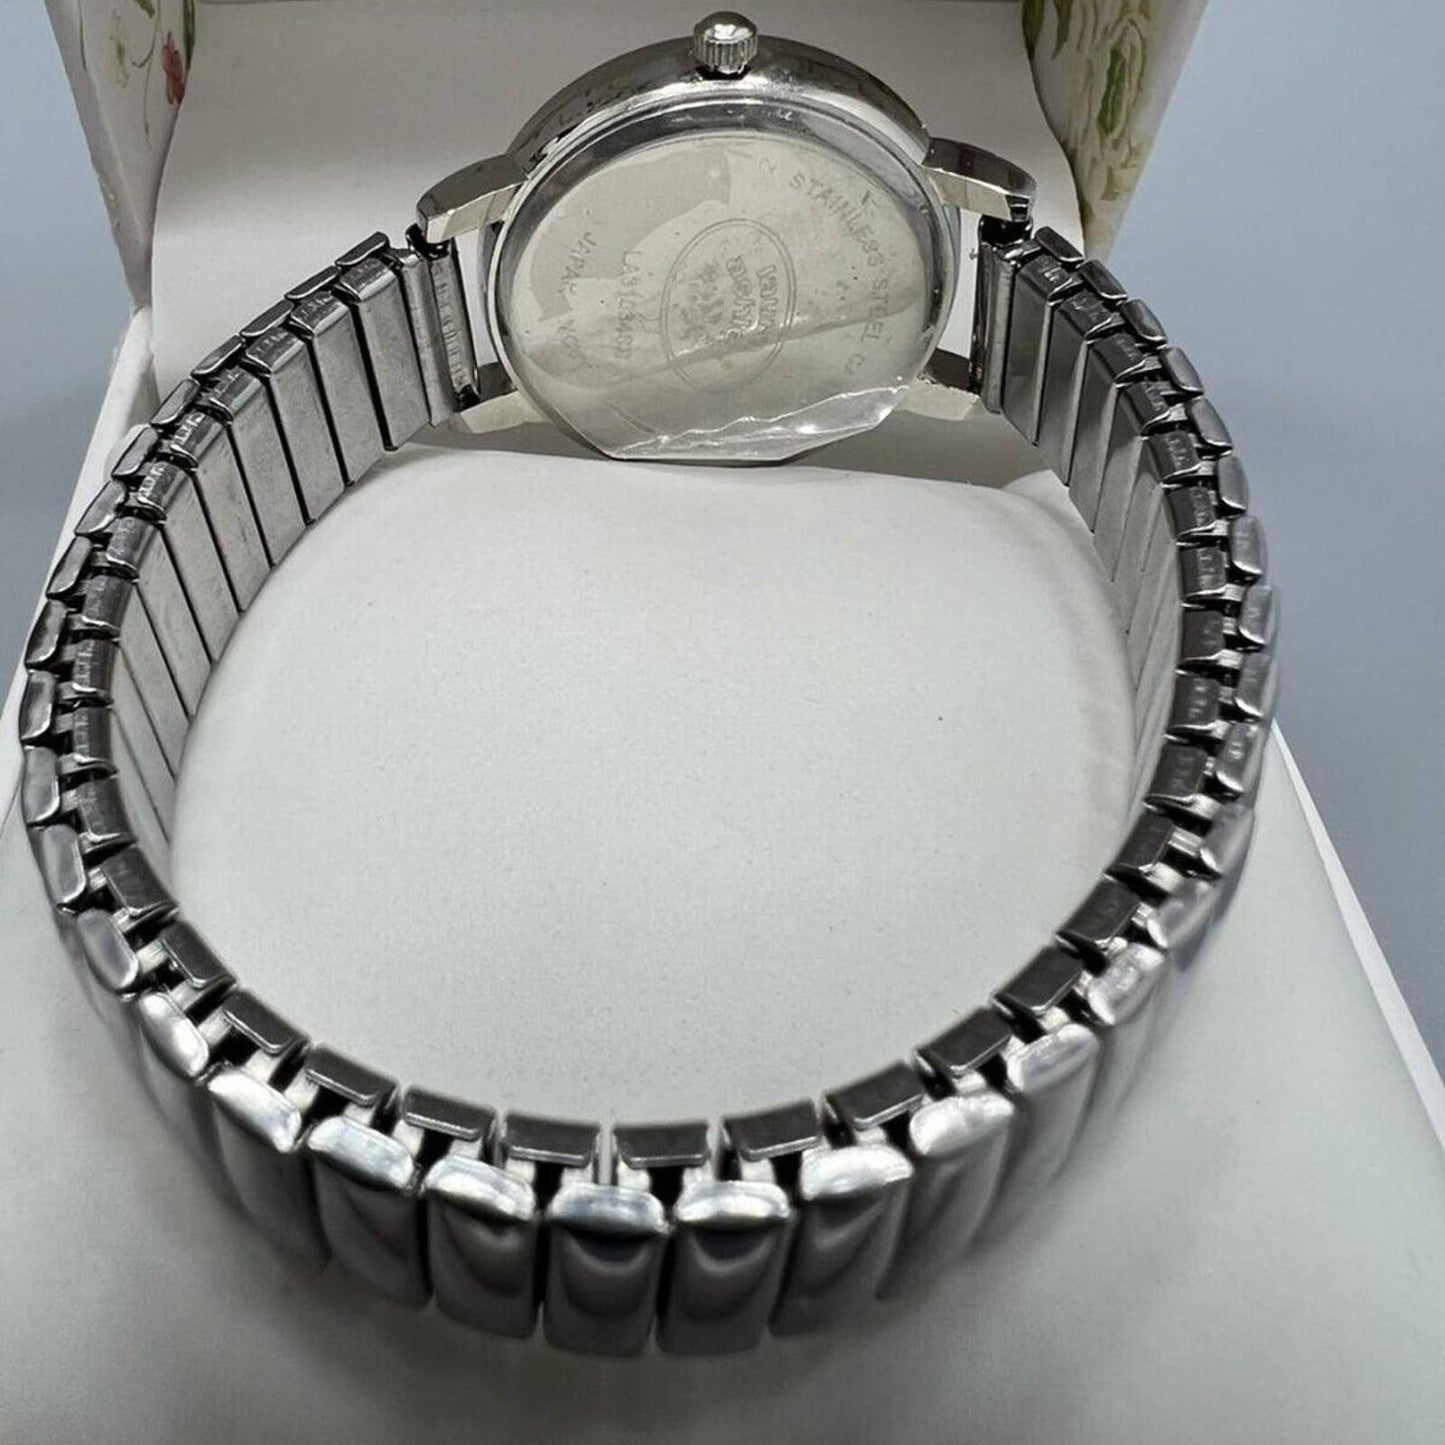 Laura Ashley Women's Round Expandable Stainless Steel Bracelet Watch